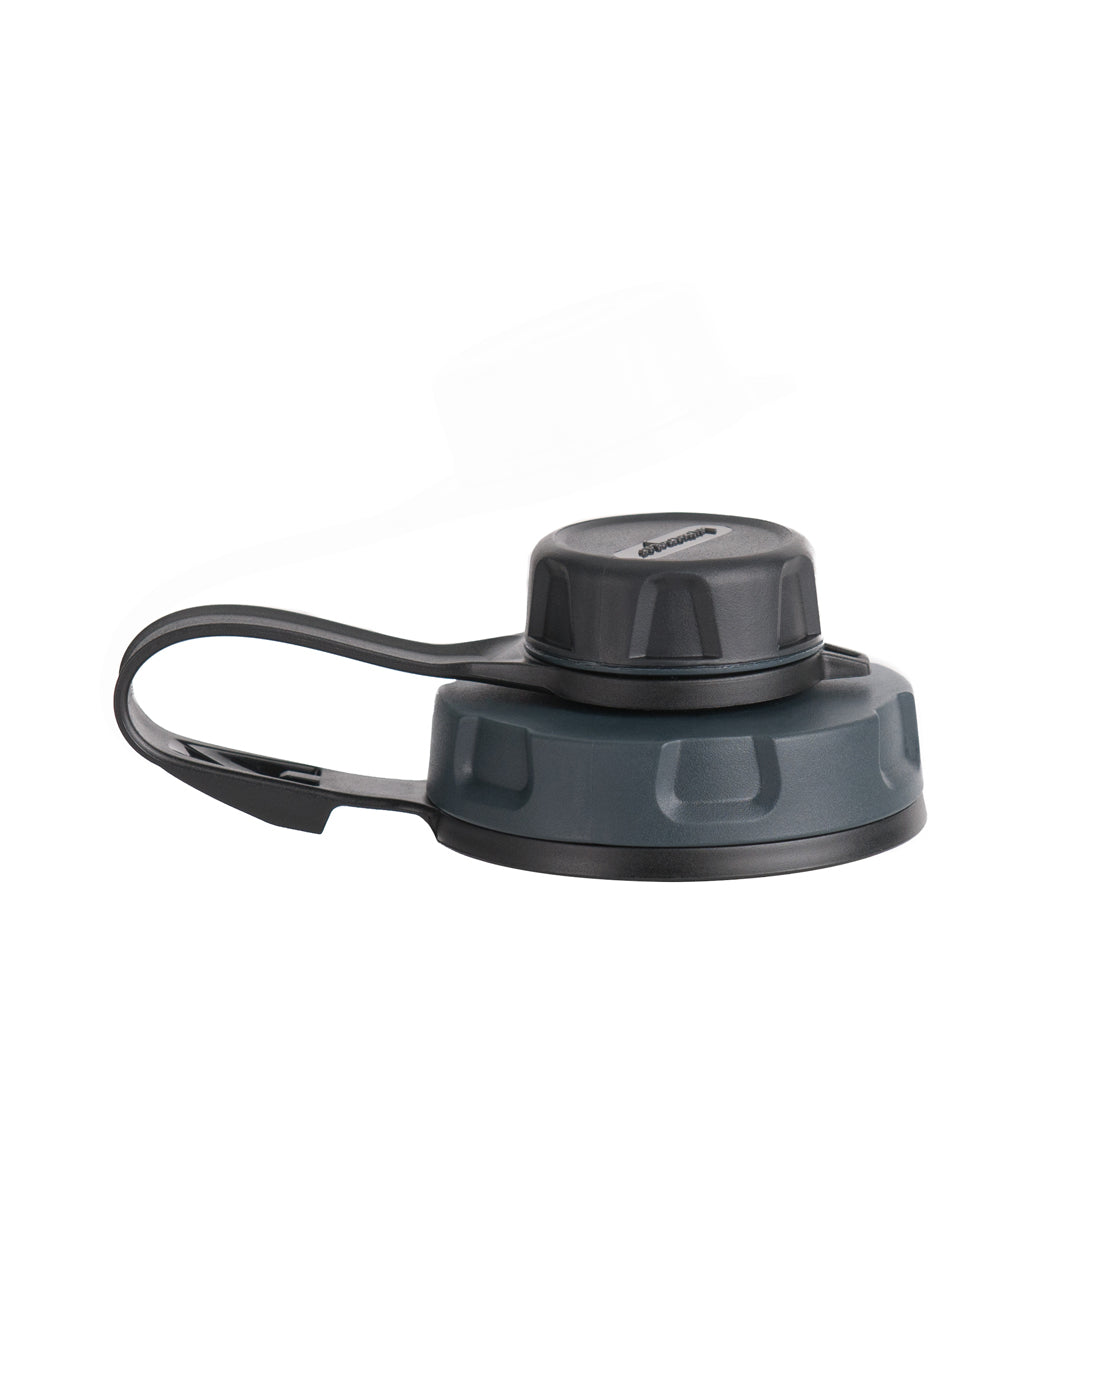 capCAP is a 2-in-1 accessory cap designed to work with Nalgene